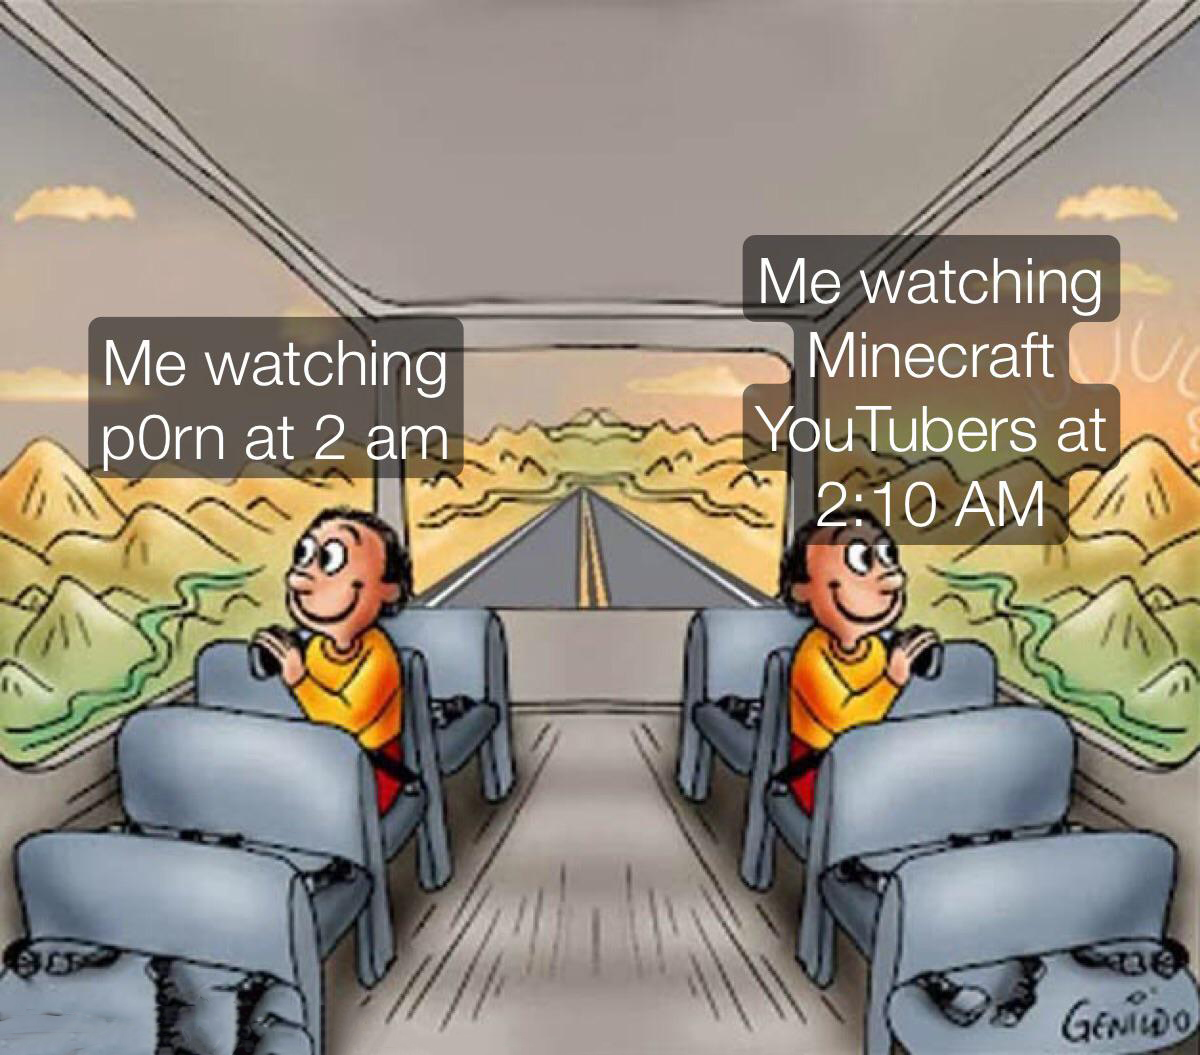 funny gaming memes  - society if twitter didn t exist - Me watching porn at 2 am Me watching Minecraft cu YouTubers at Gendo